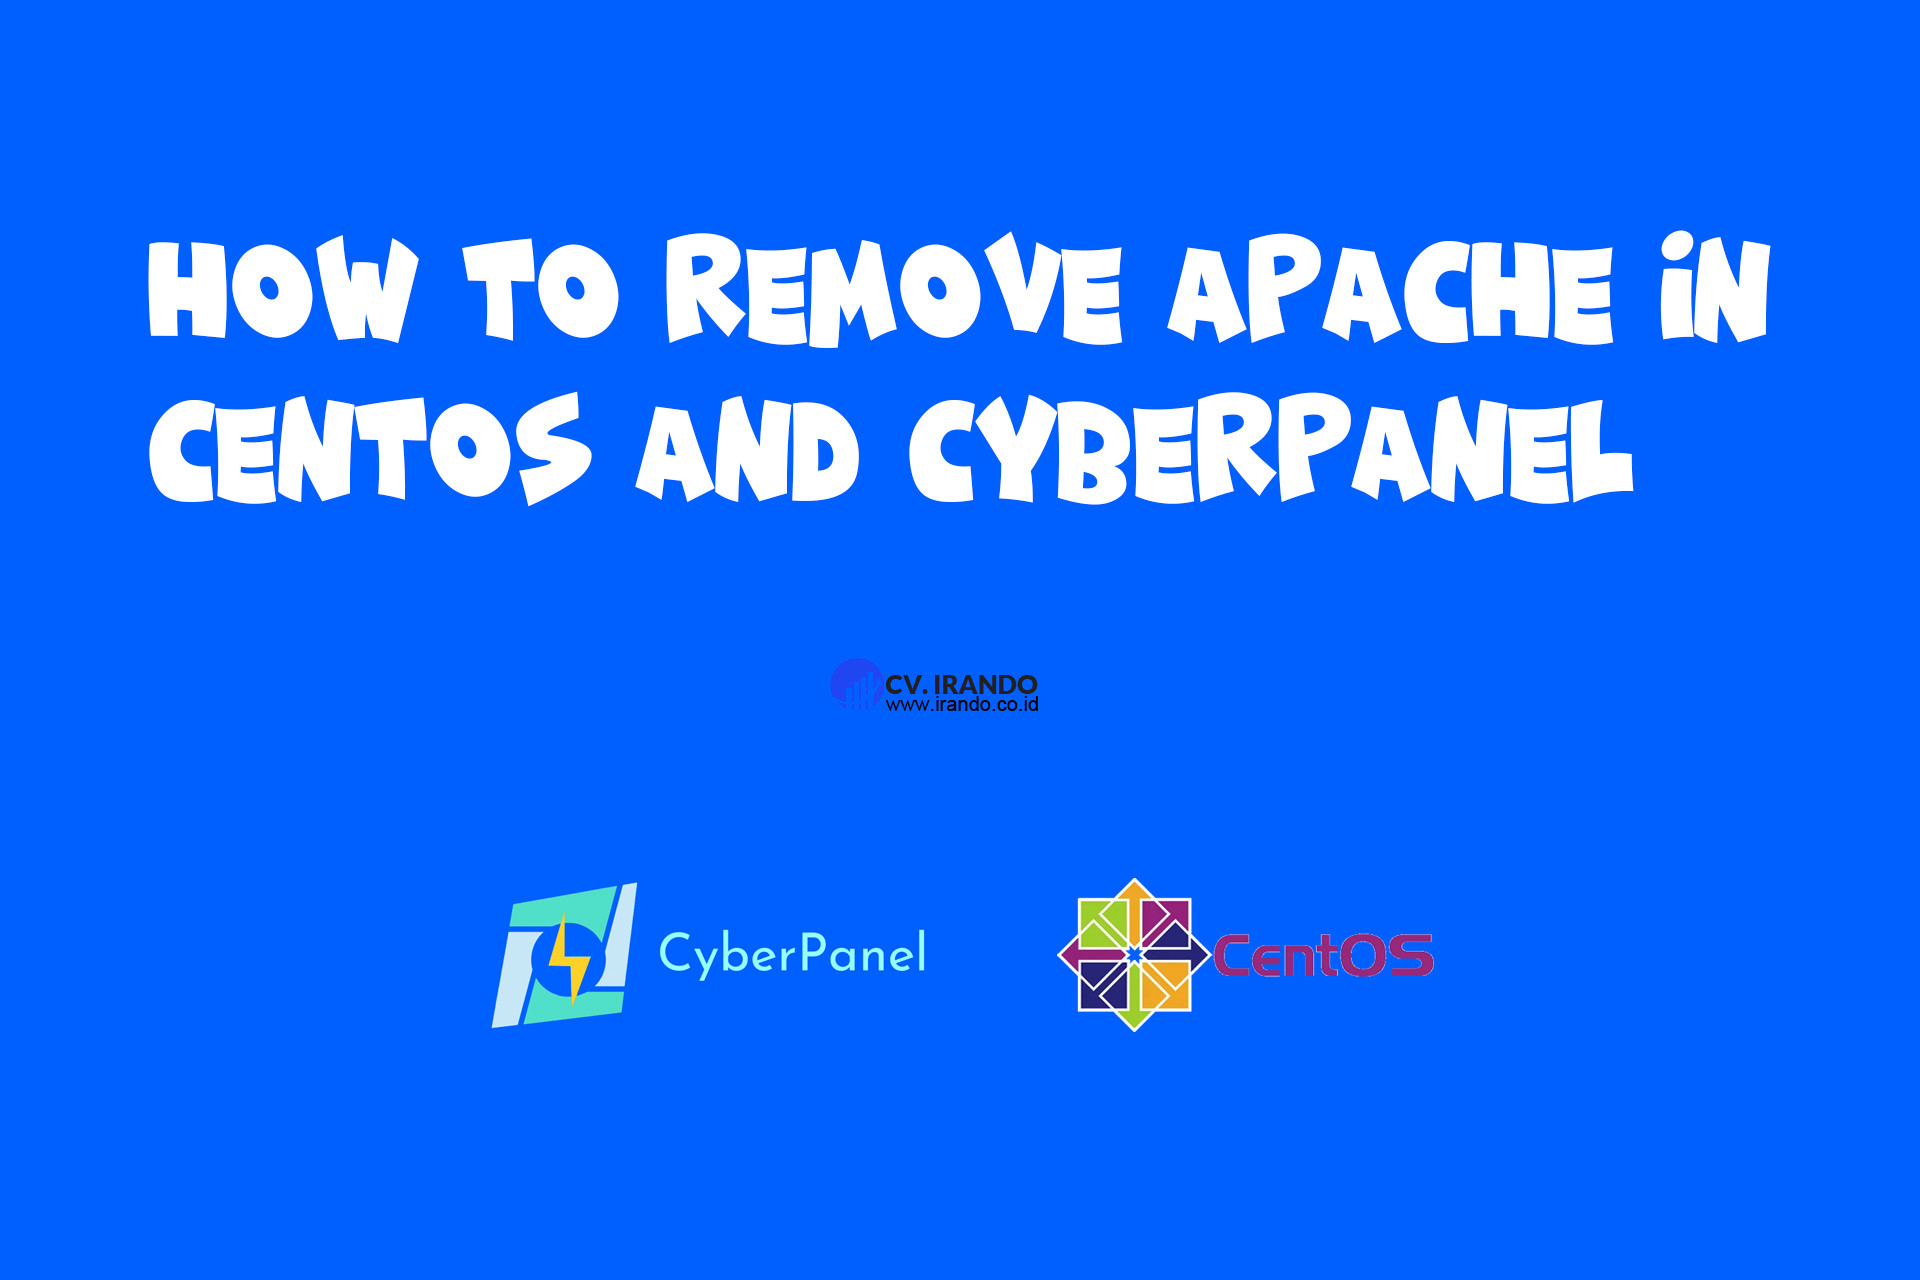 How to remove apache in centos and cyberpanel